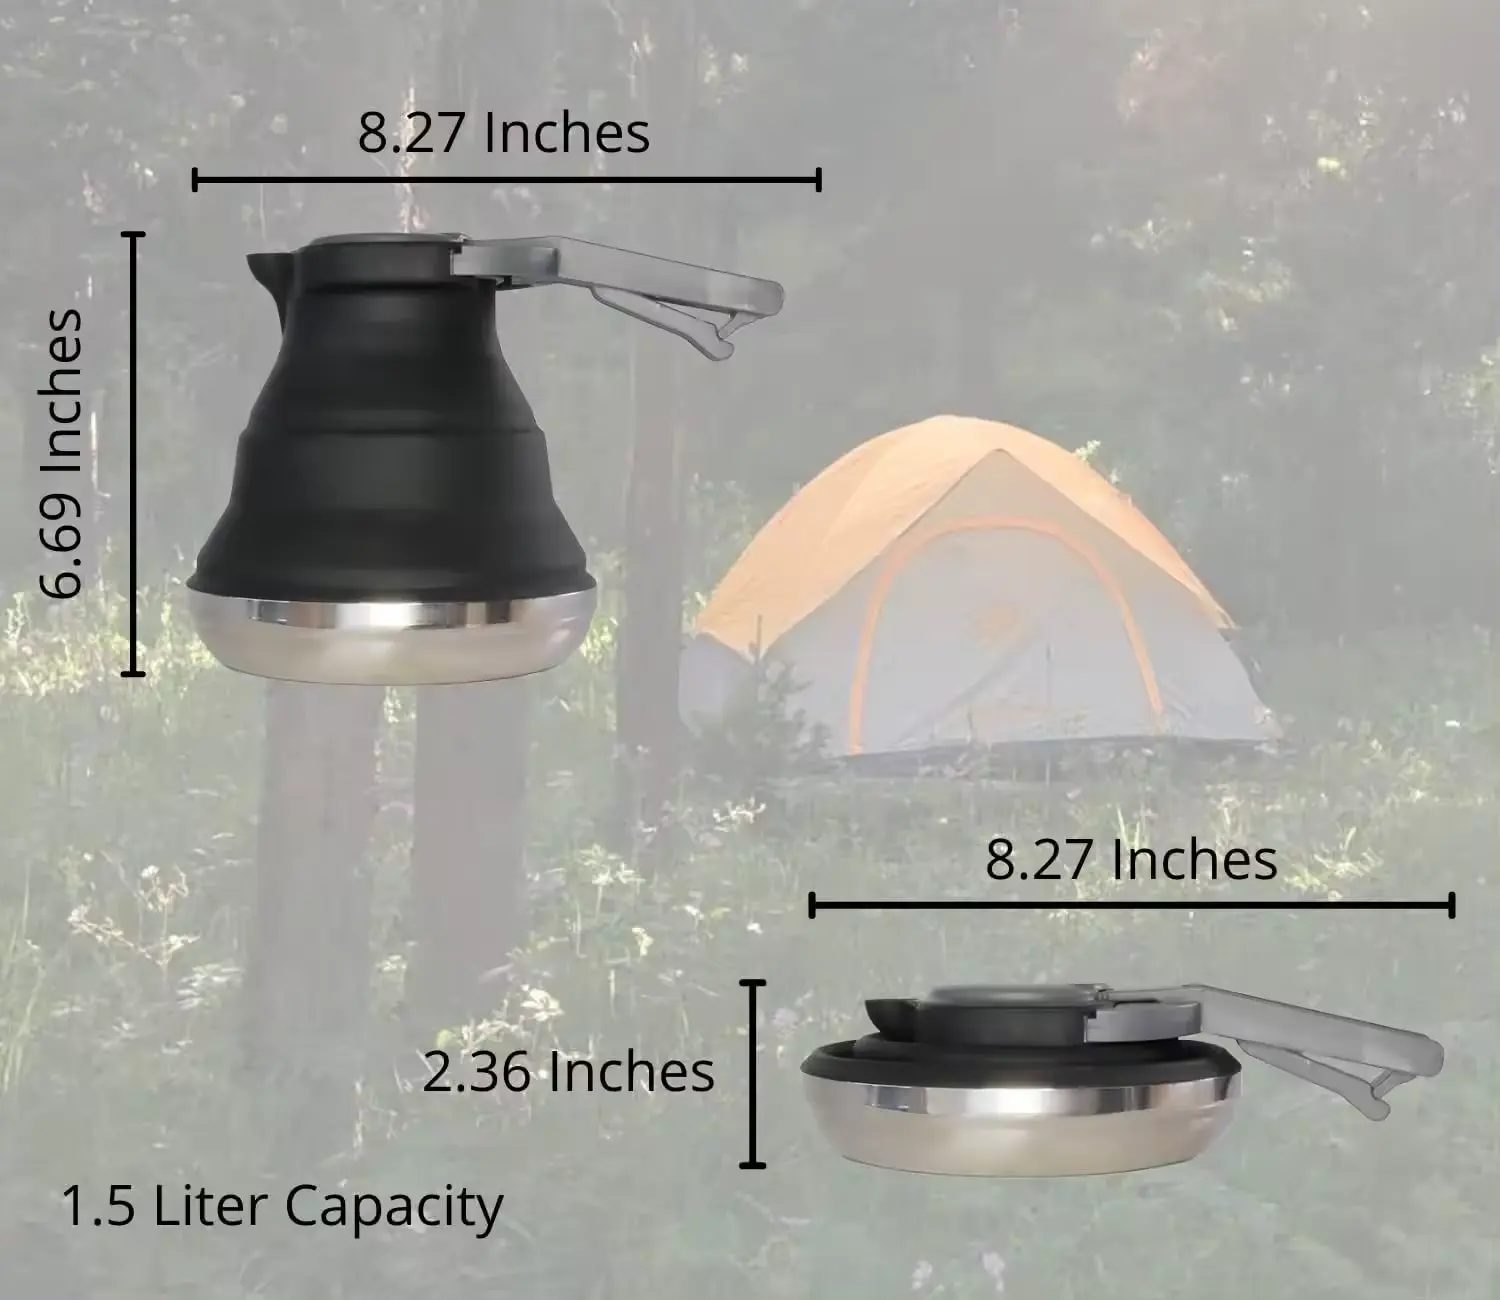 NPOT Portable Silicone Collapsible Tea Bottle Outdoor Camping Travel Water Kettles Silicone Kettle